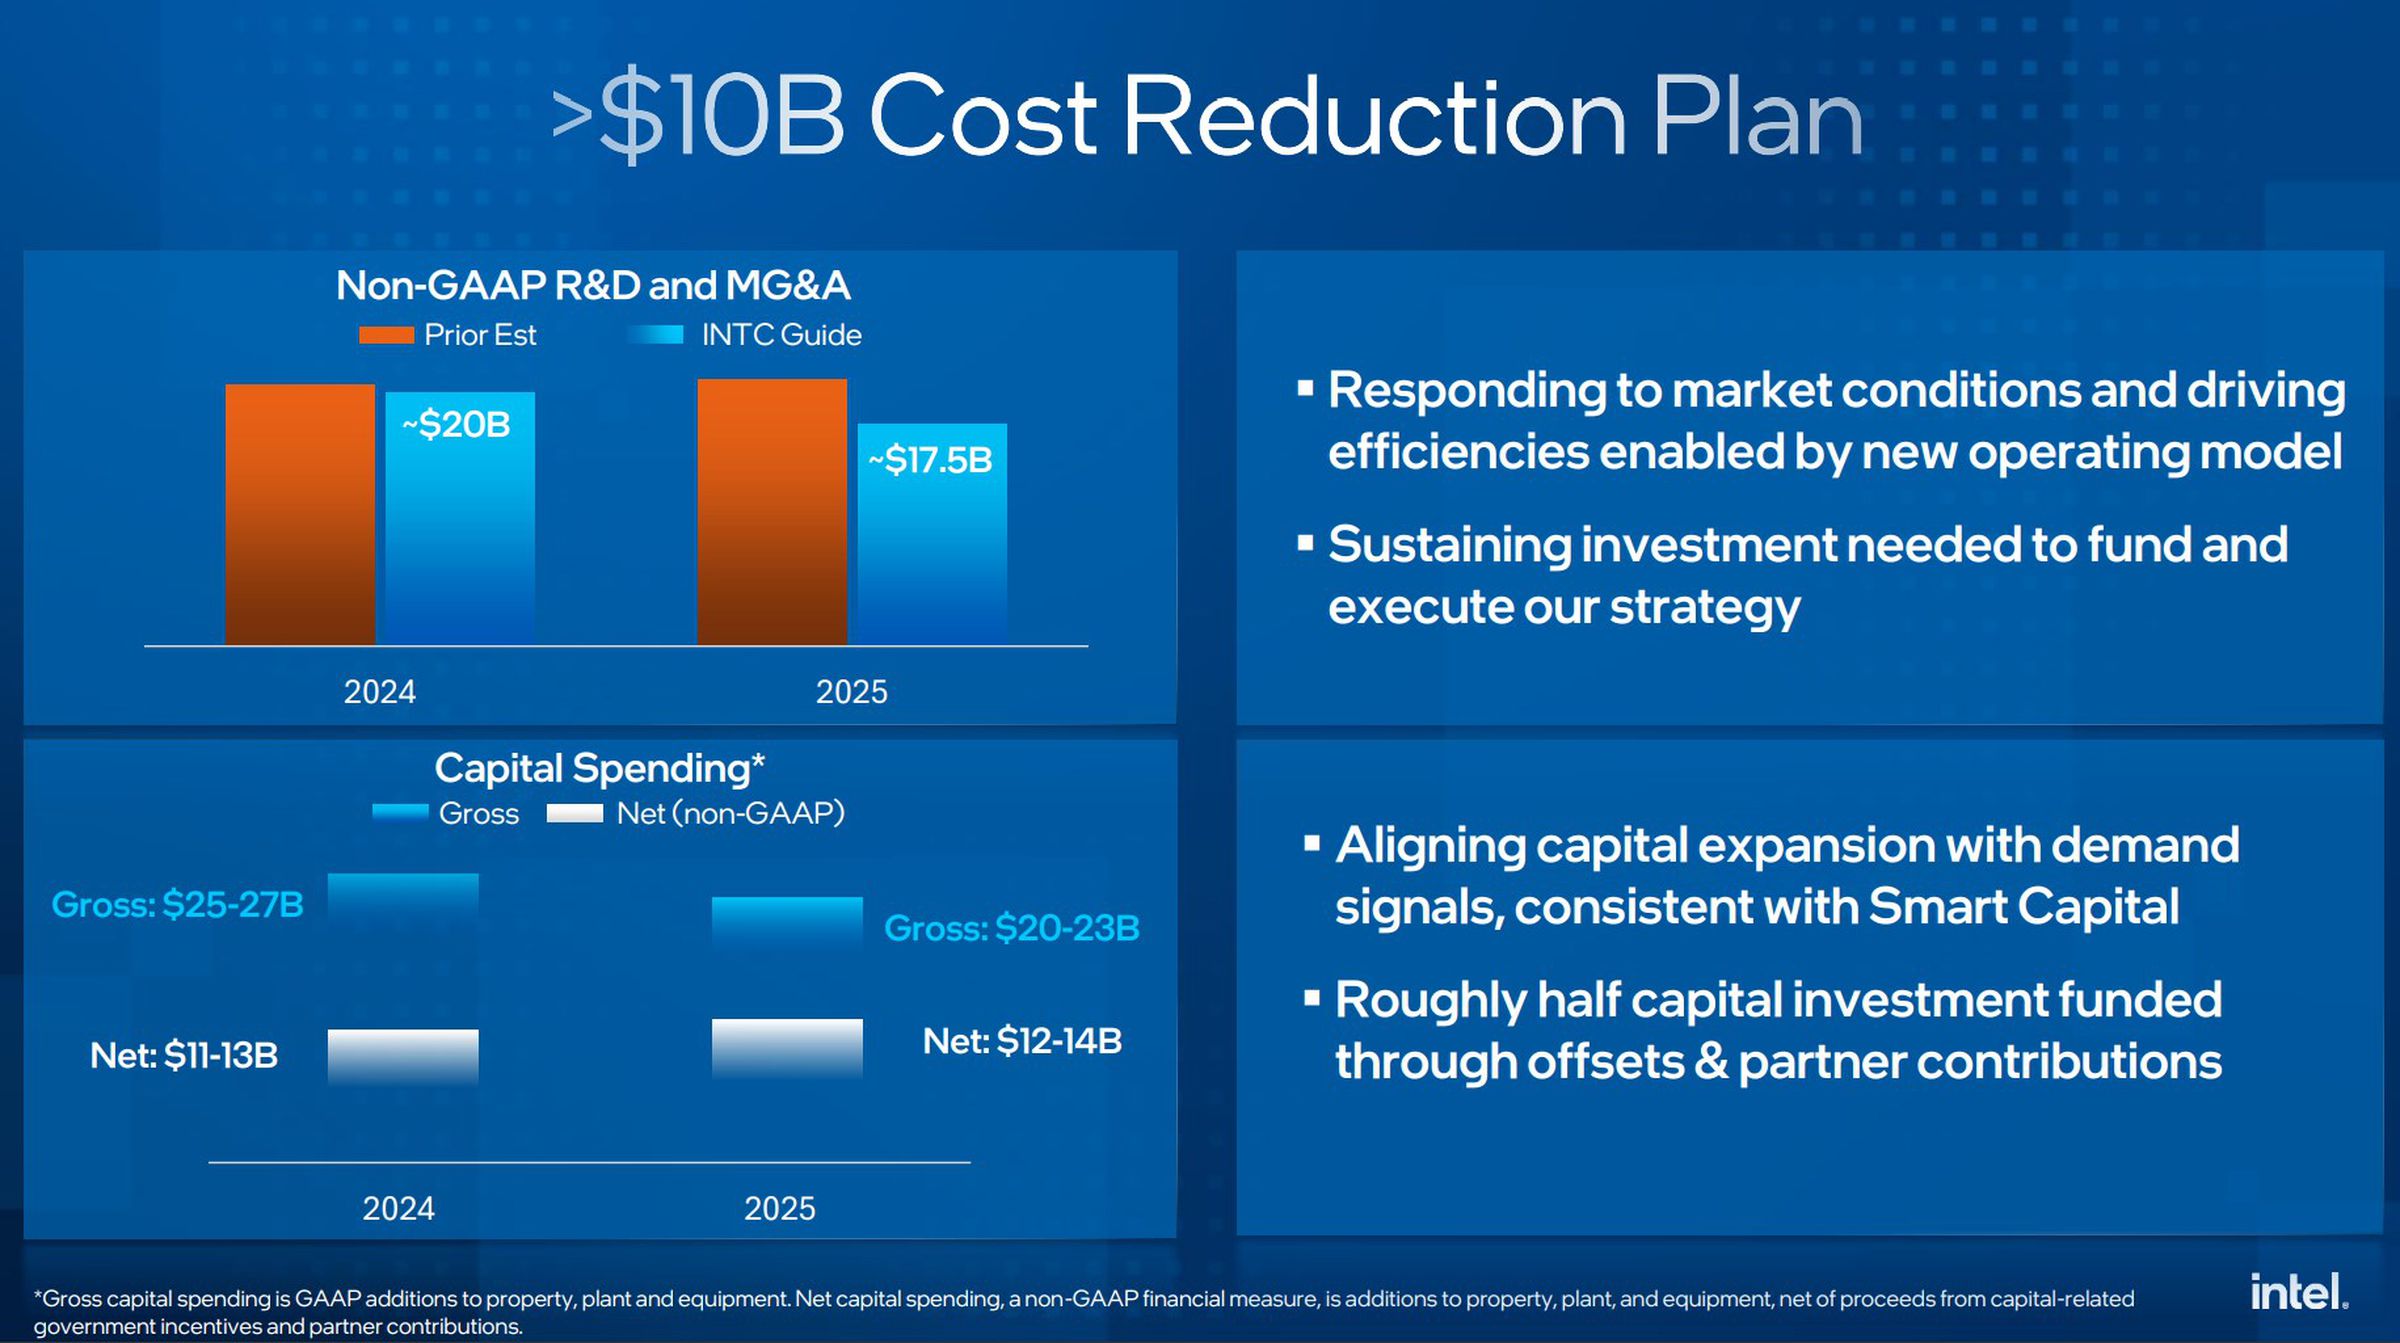 Intel plans to reduce spend by billions each year. Here’s how it’ll begin.